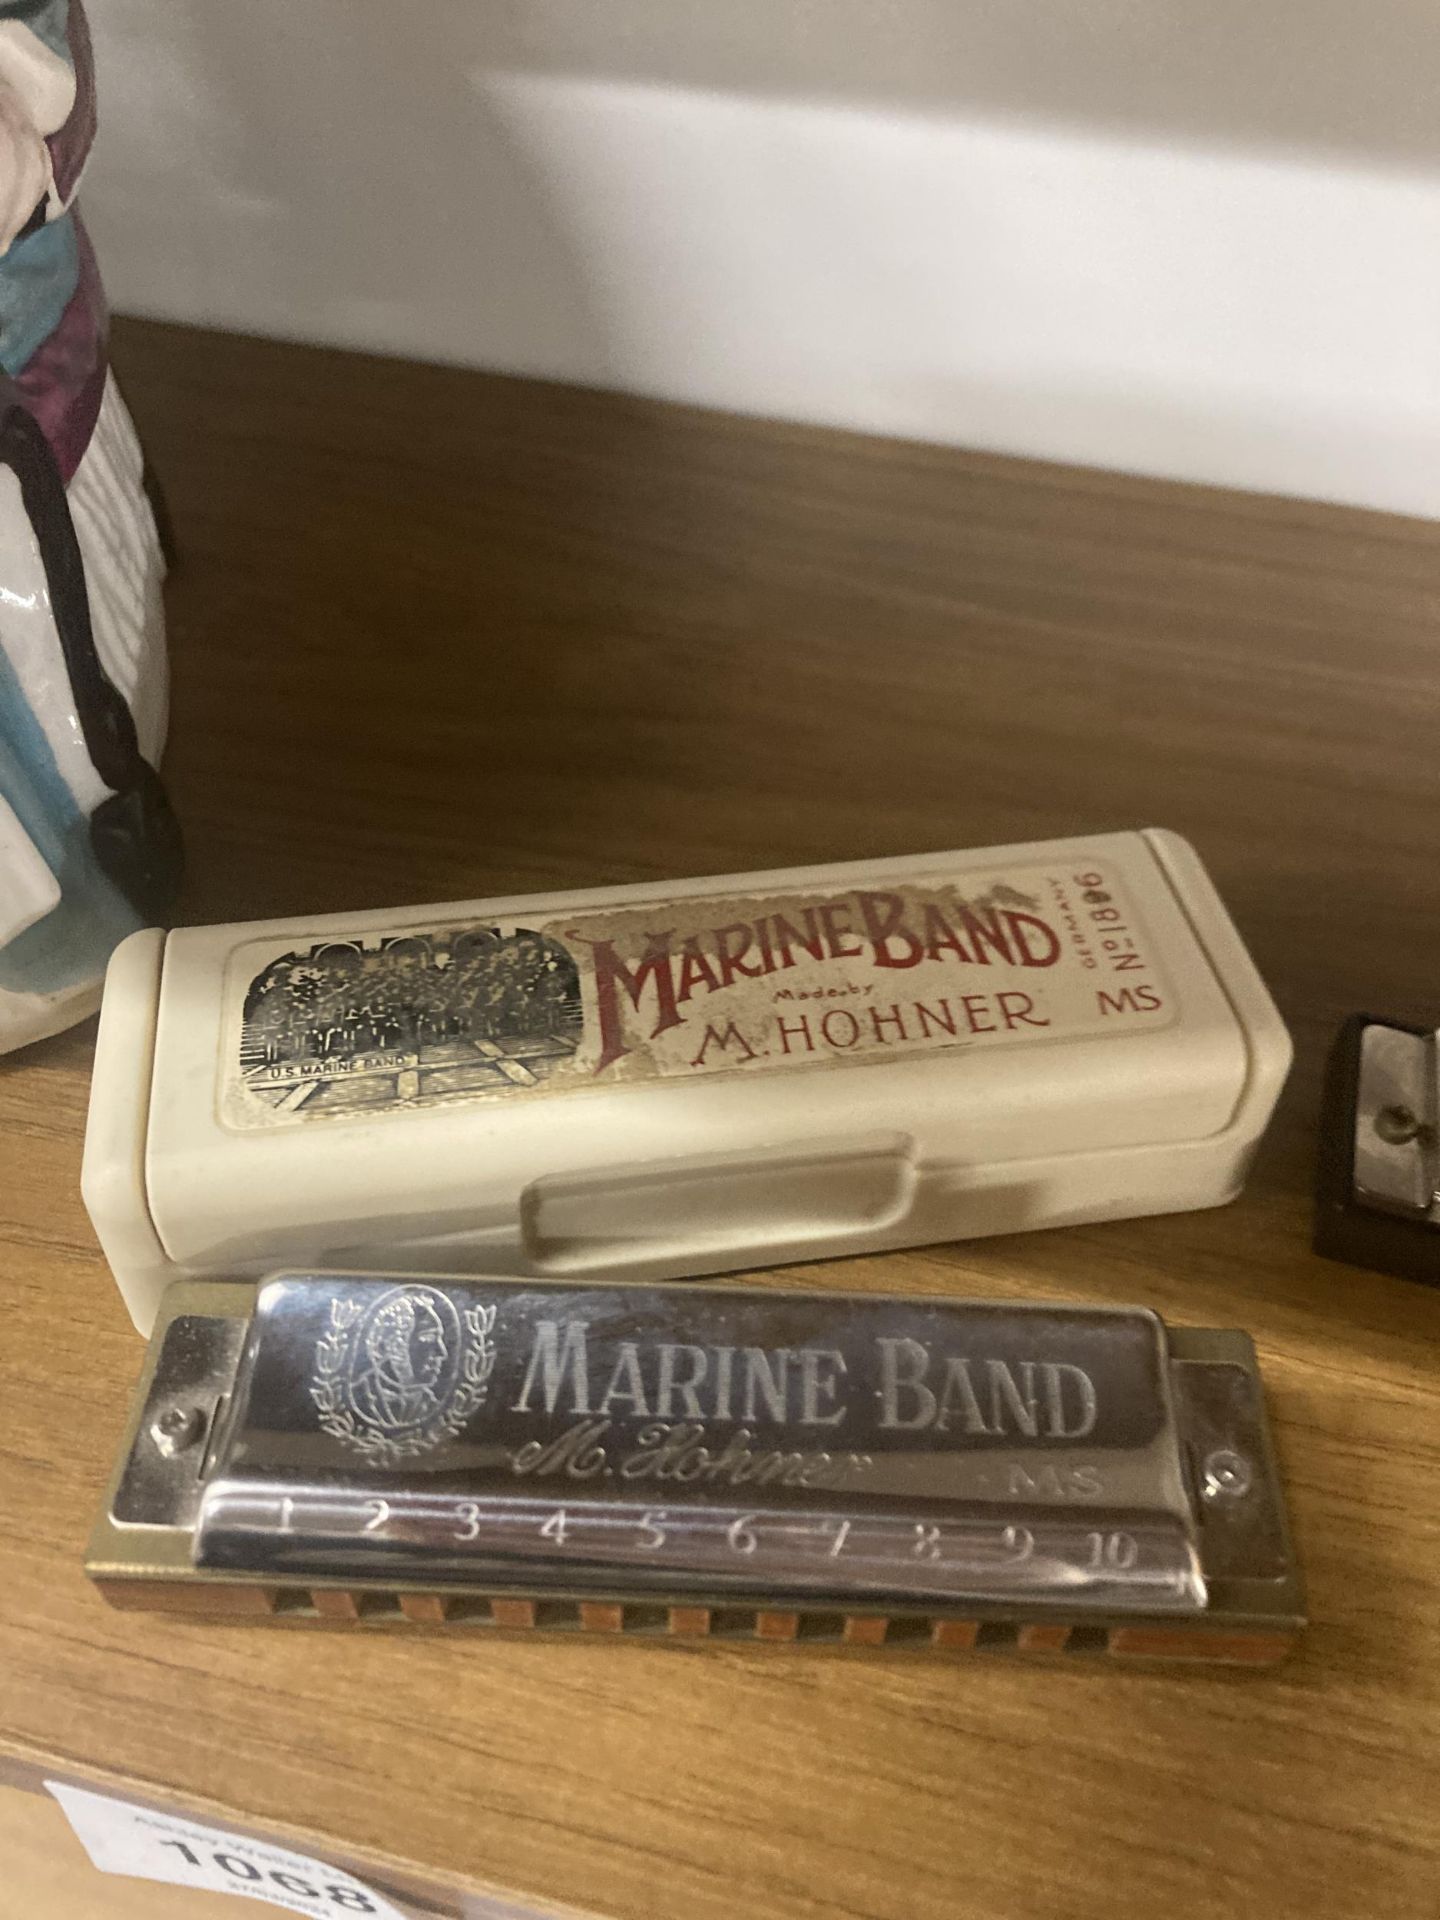 THREE HARMONICAS TO INCLUDE A HOHNER MARINE BAND NO. 1896, A HOHNER GREAT LITTLE HARP AND A HERO - Image 2 of 3